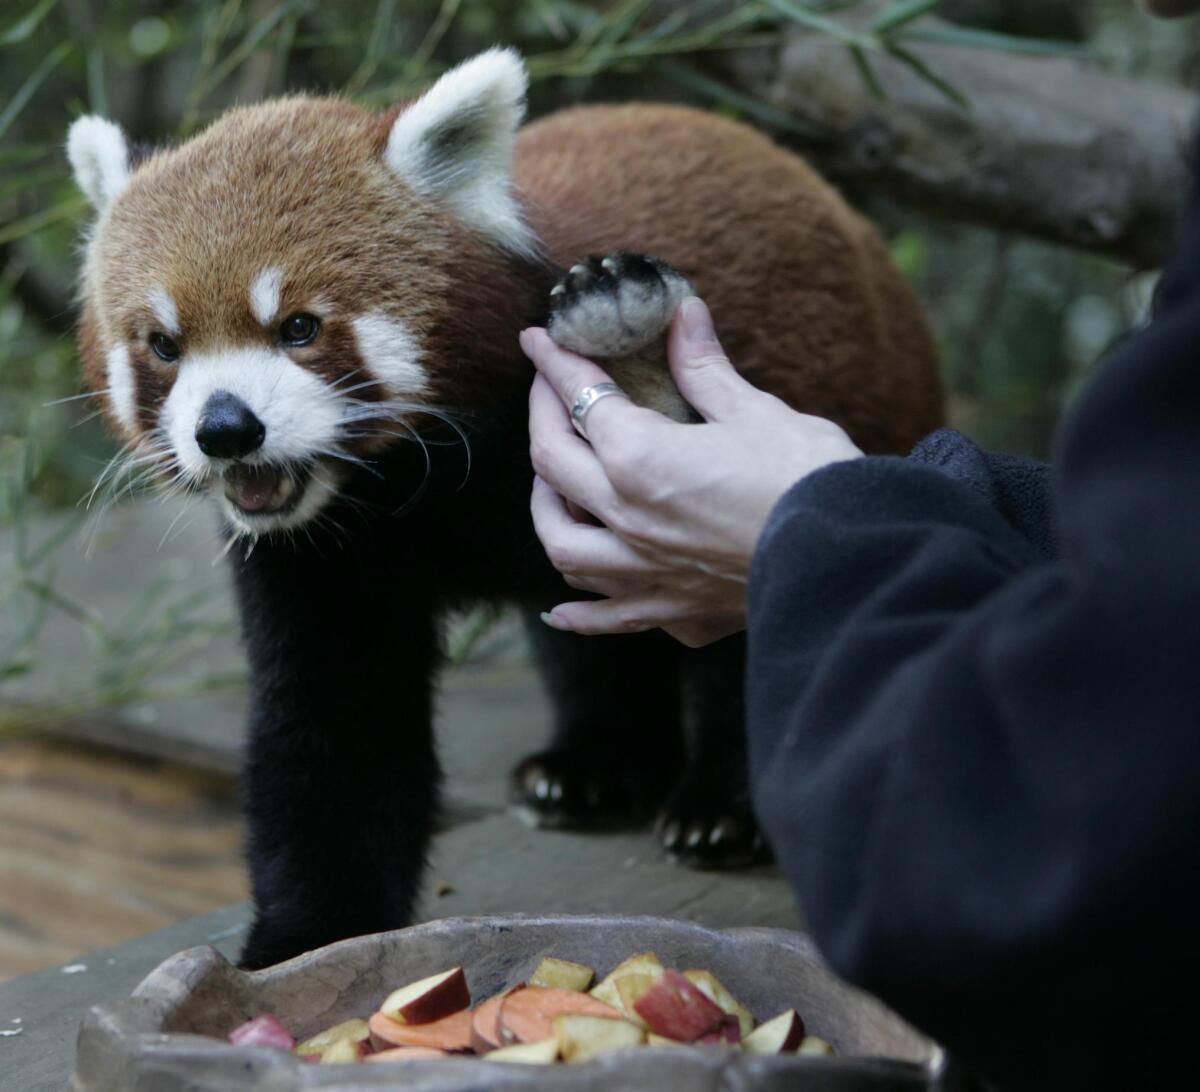 Zookeeper Janell Roesener inspects the paw of a Red Panda from China named Fuji